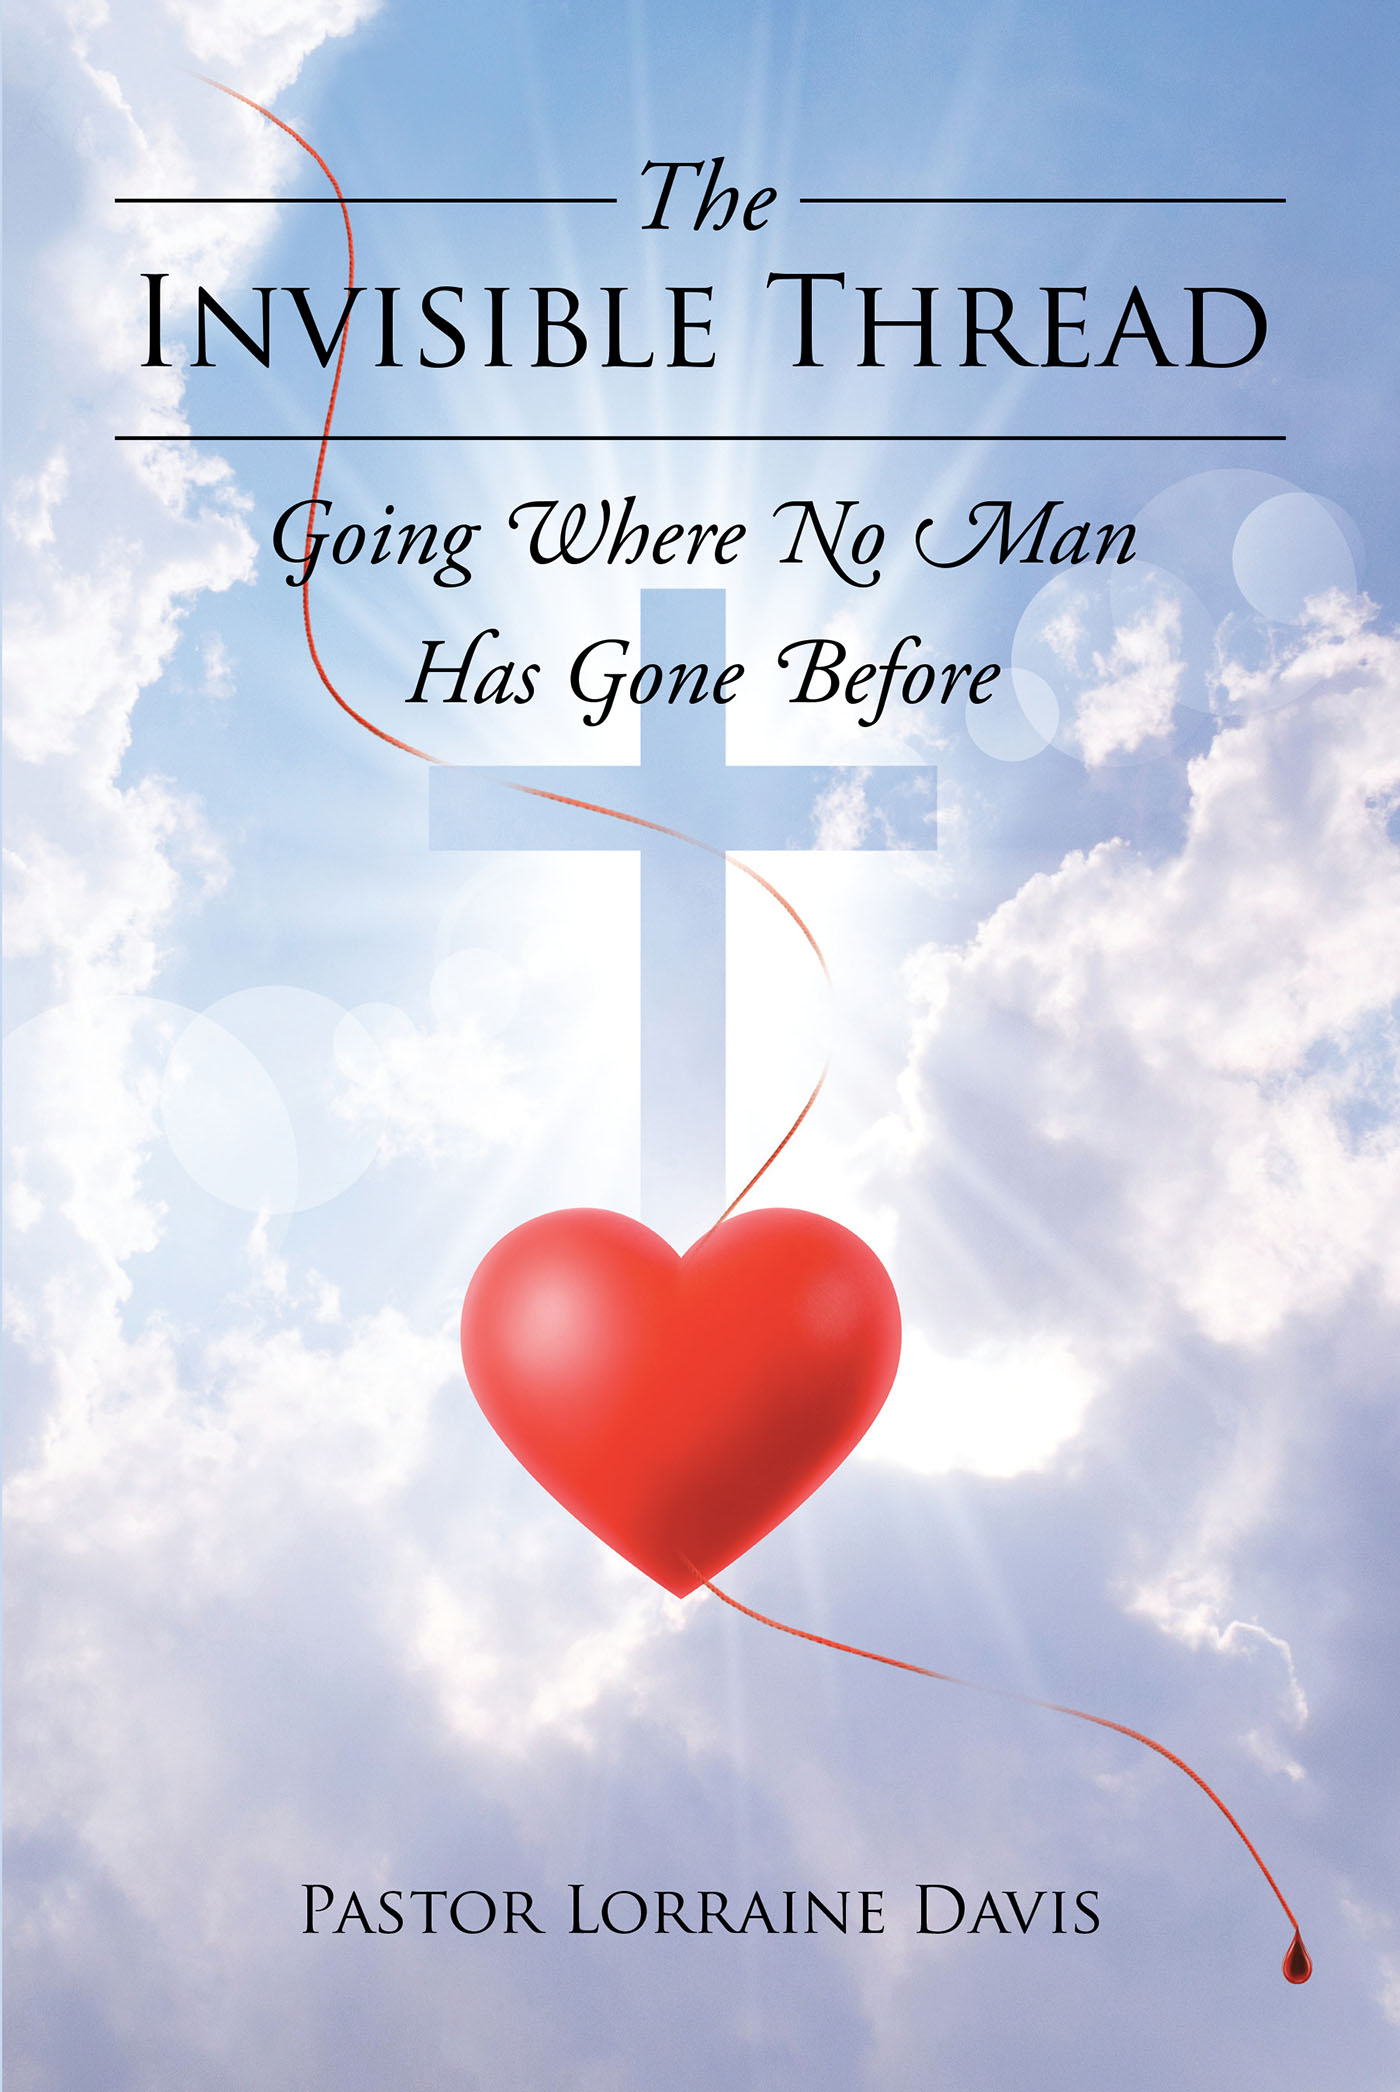 Pastor Lorraine Davis’s Newly Released “The Invisible Thread: Going Where No Man Has Gone Before” is a Thoughtful Reflection on the Tie That Binds Us to God